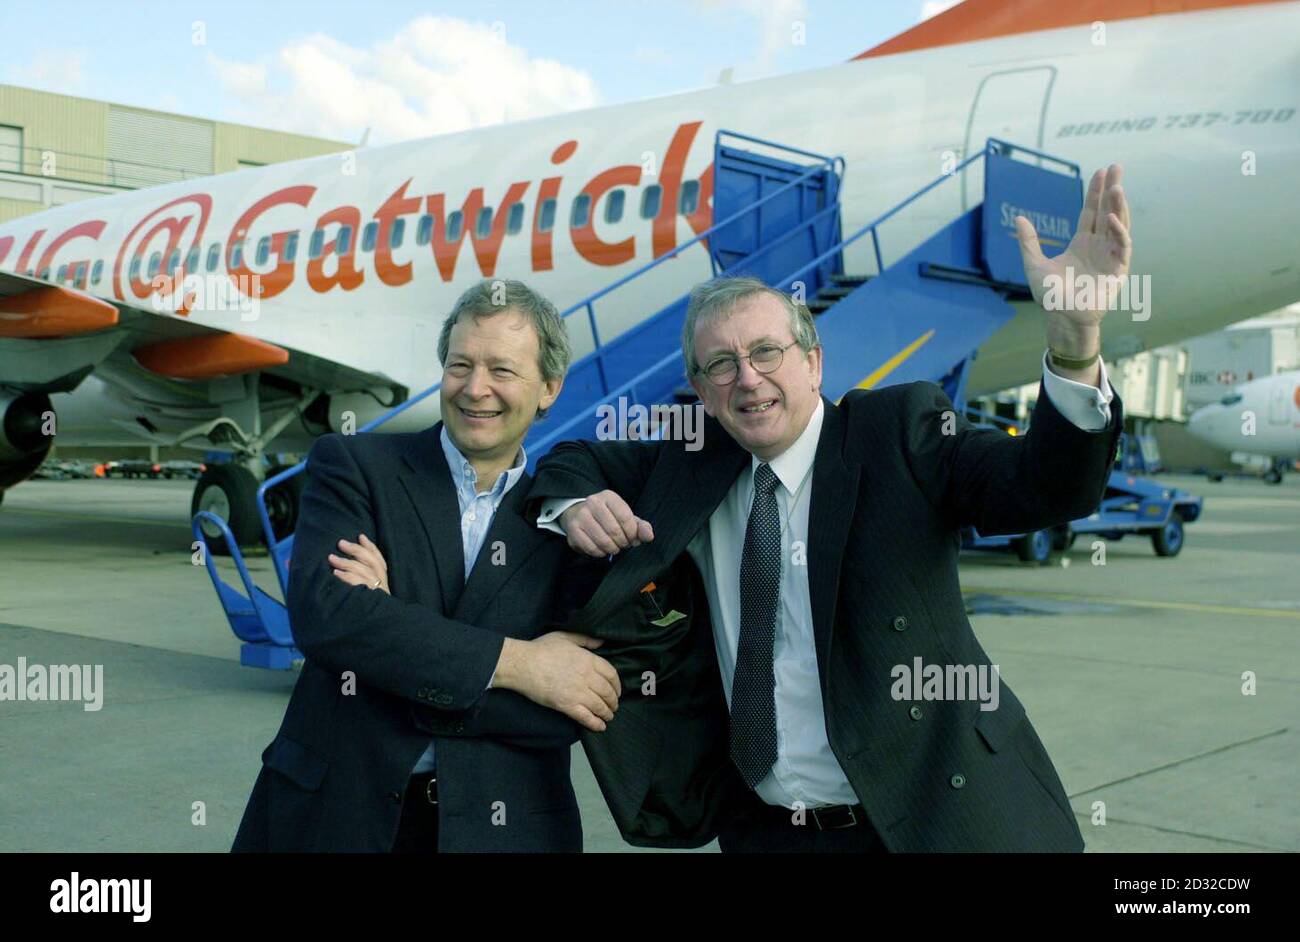 Chief Executive of low cost airline easyJet, Ray Webster (left), joins Gatwick Managing Director, Roger Cato, at Gatwick Airport, south London to launch the fifth of easyJet's new routes from Gatwick.   *EasyJet now operates a total of eight routes out of Gatwick with flights to and from Zurich being the latest addition. Stock Photo